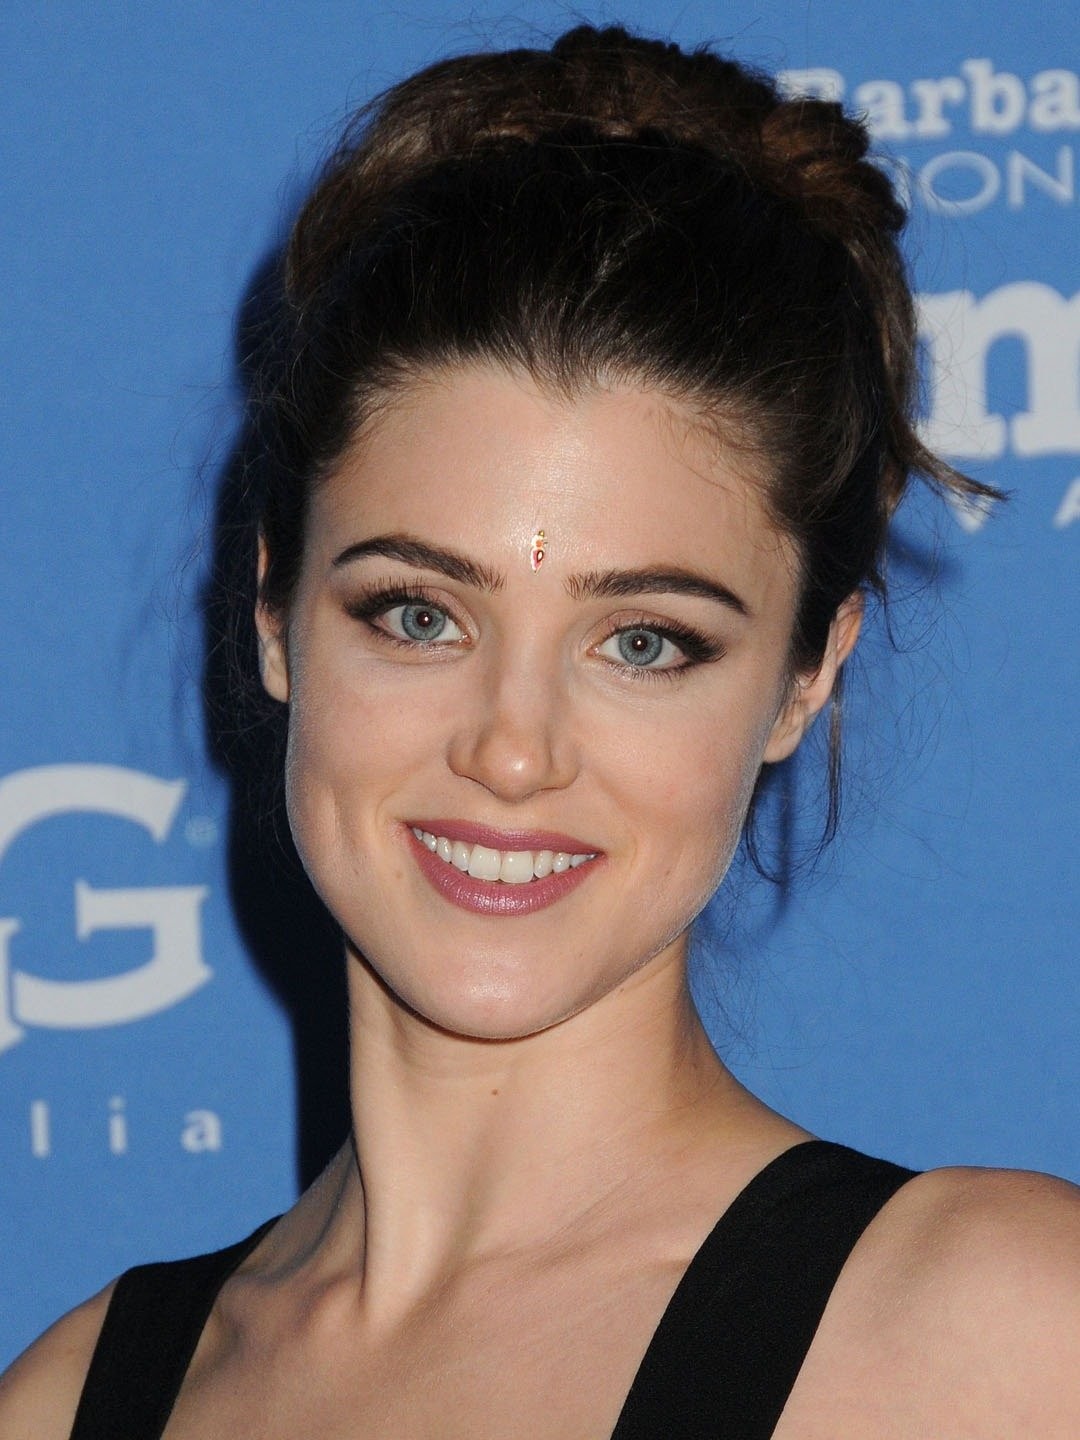 dan rooney recommends Lucy Griffiths Nude